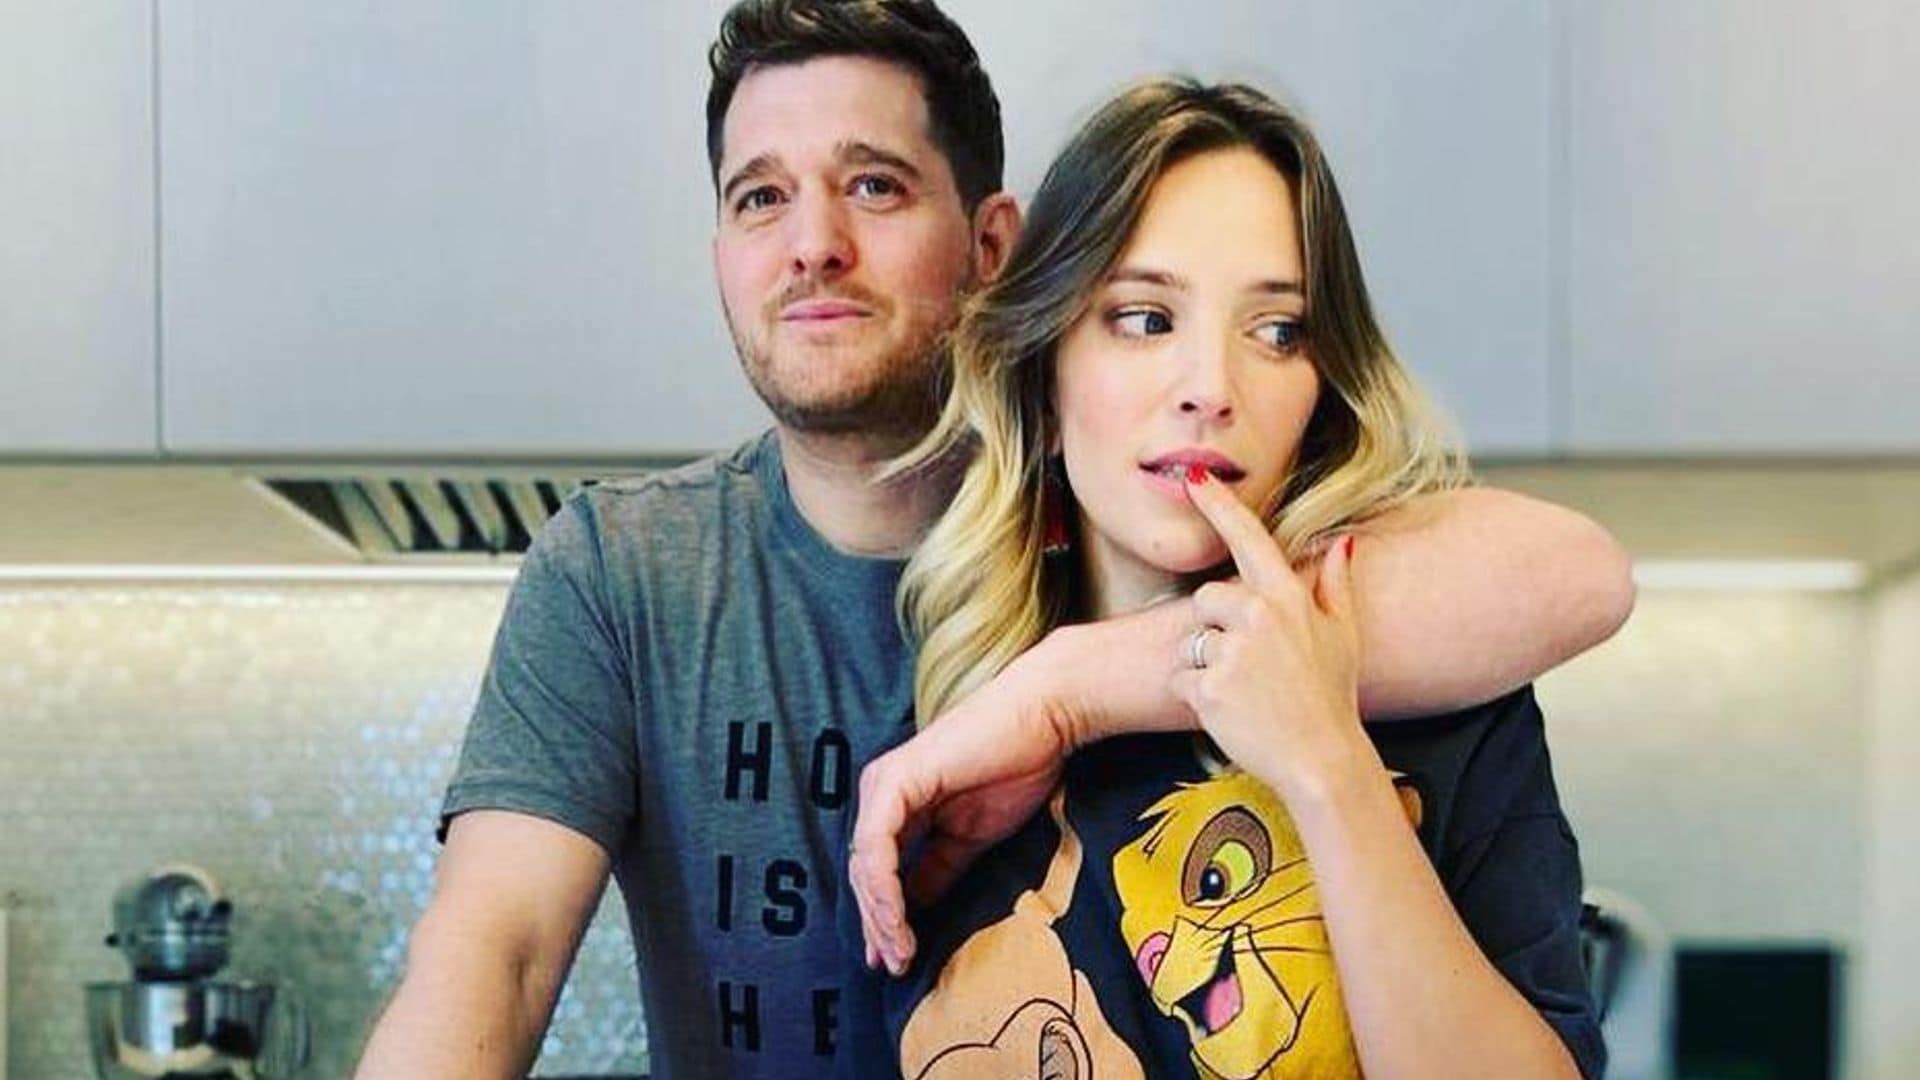 Luisana Lopilato thanks fans for worrying but stresses ‘I’m fine’ after defending Michael Bublé videos